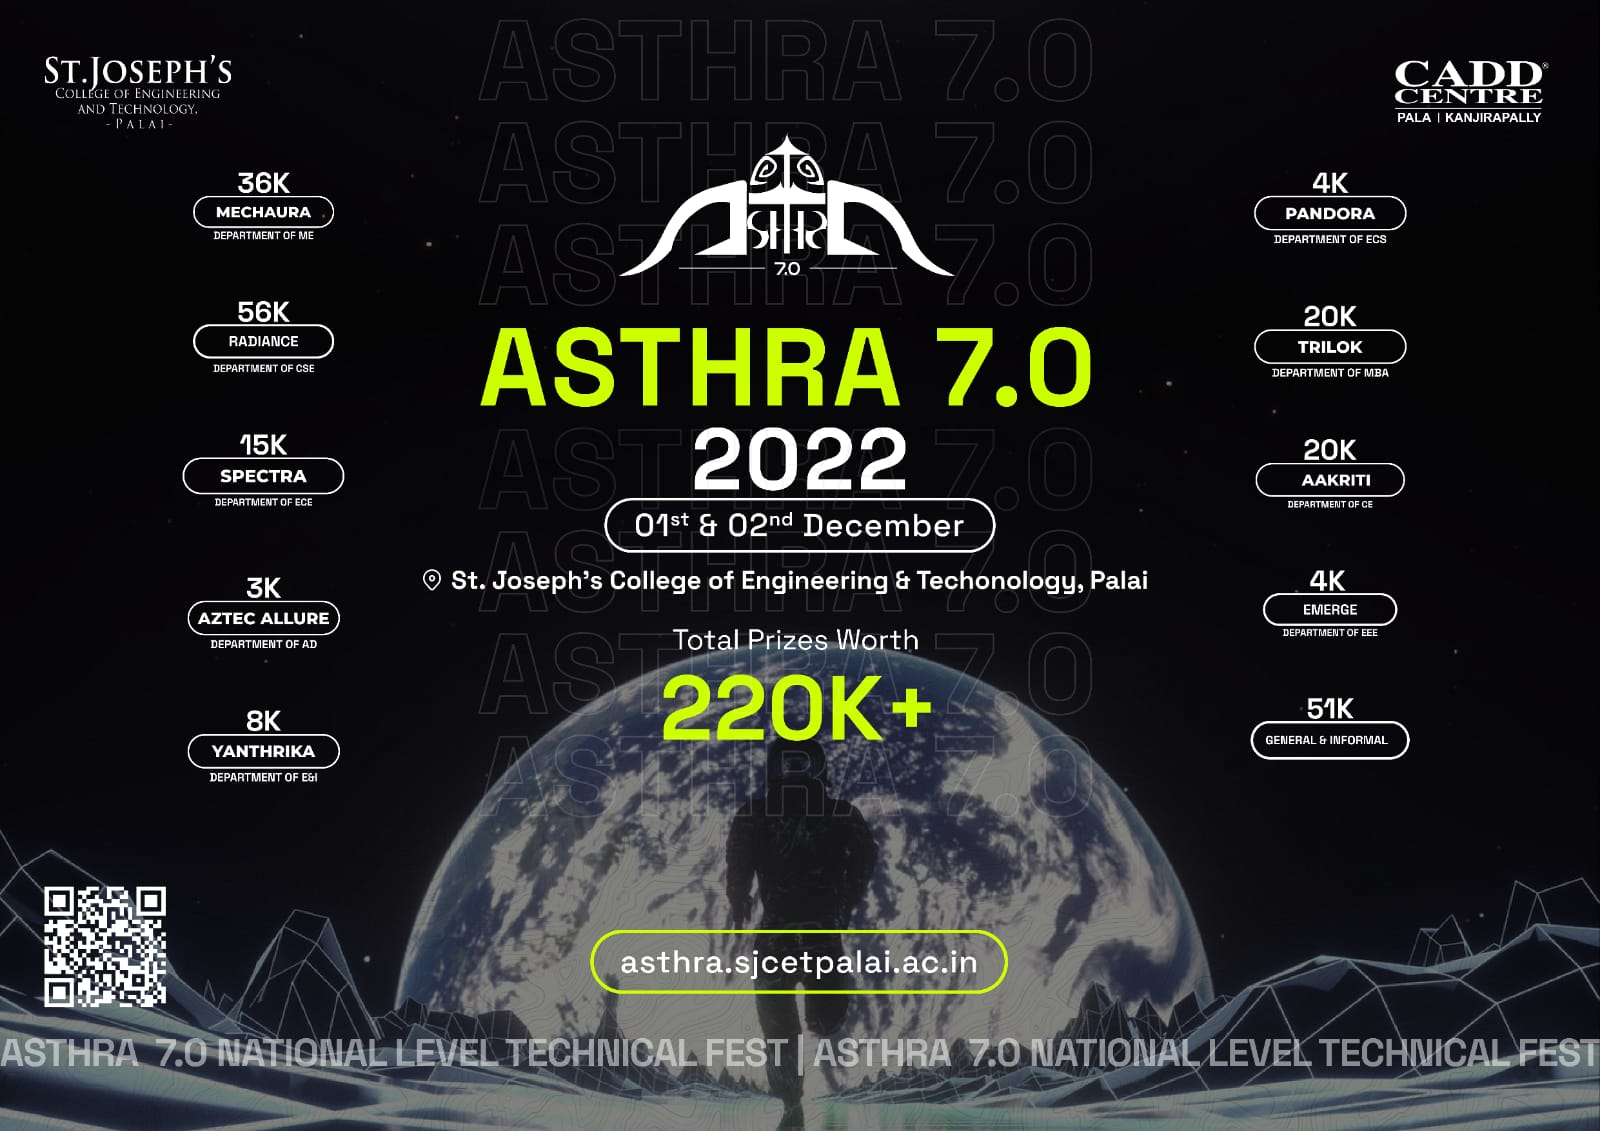 ASTHRA 7.0